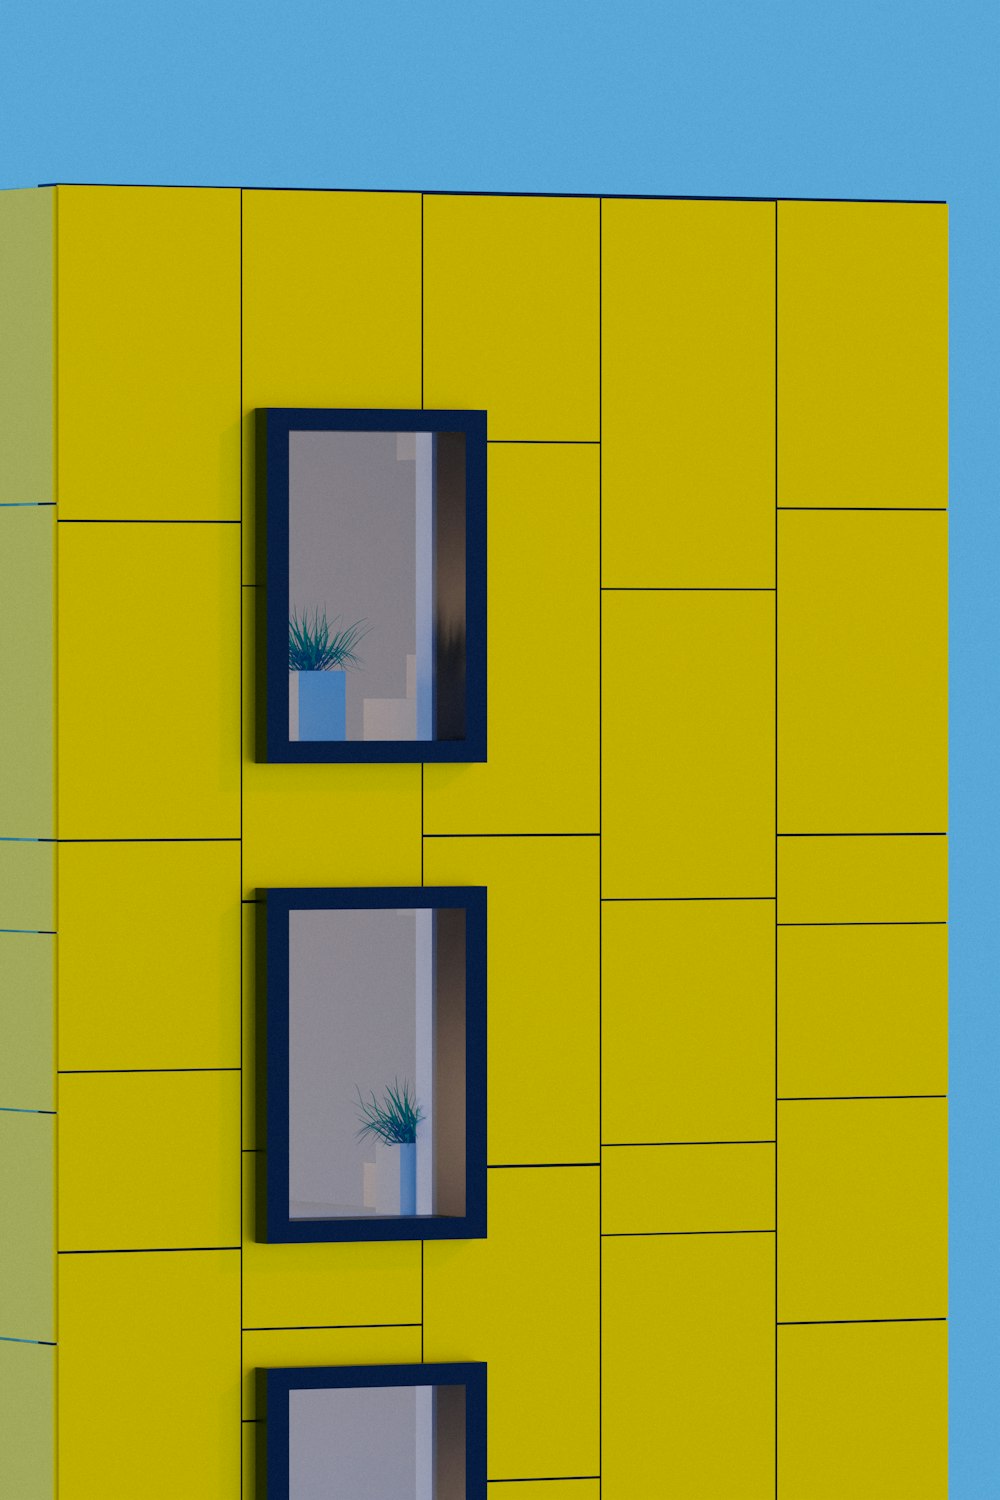 a yellow building with three windows and a plant in the window